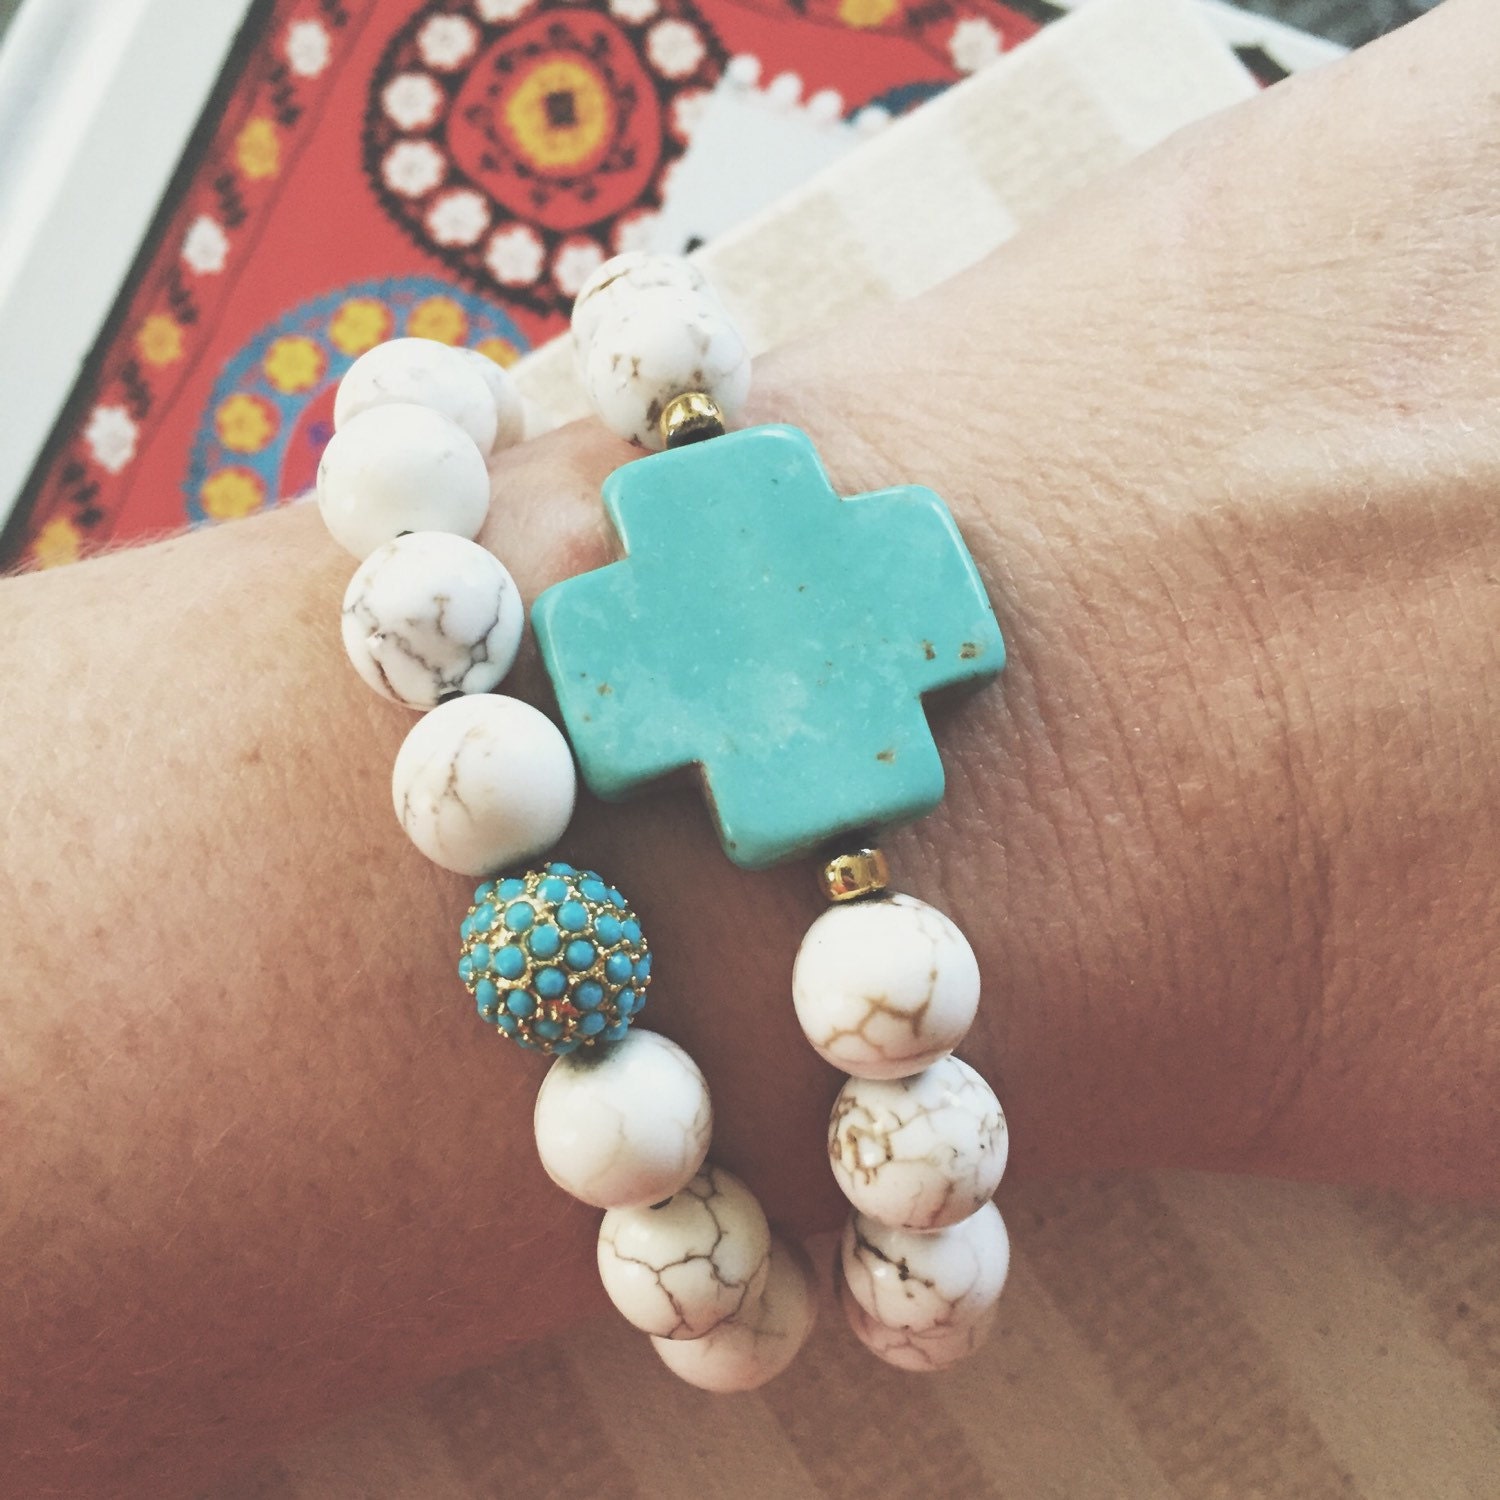 Turquoise Cross Bracelet // Neutral Tan or White // Picture